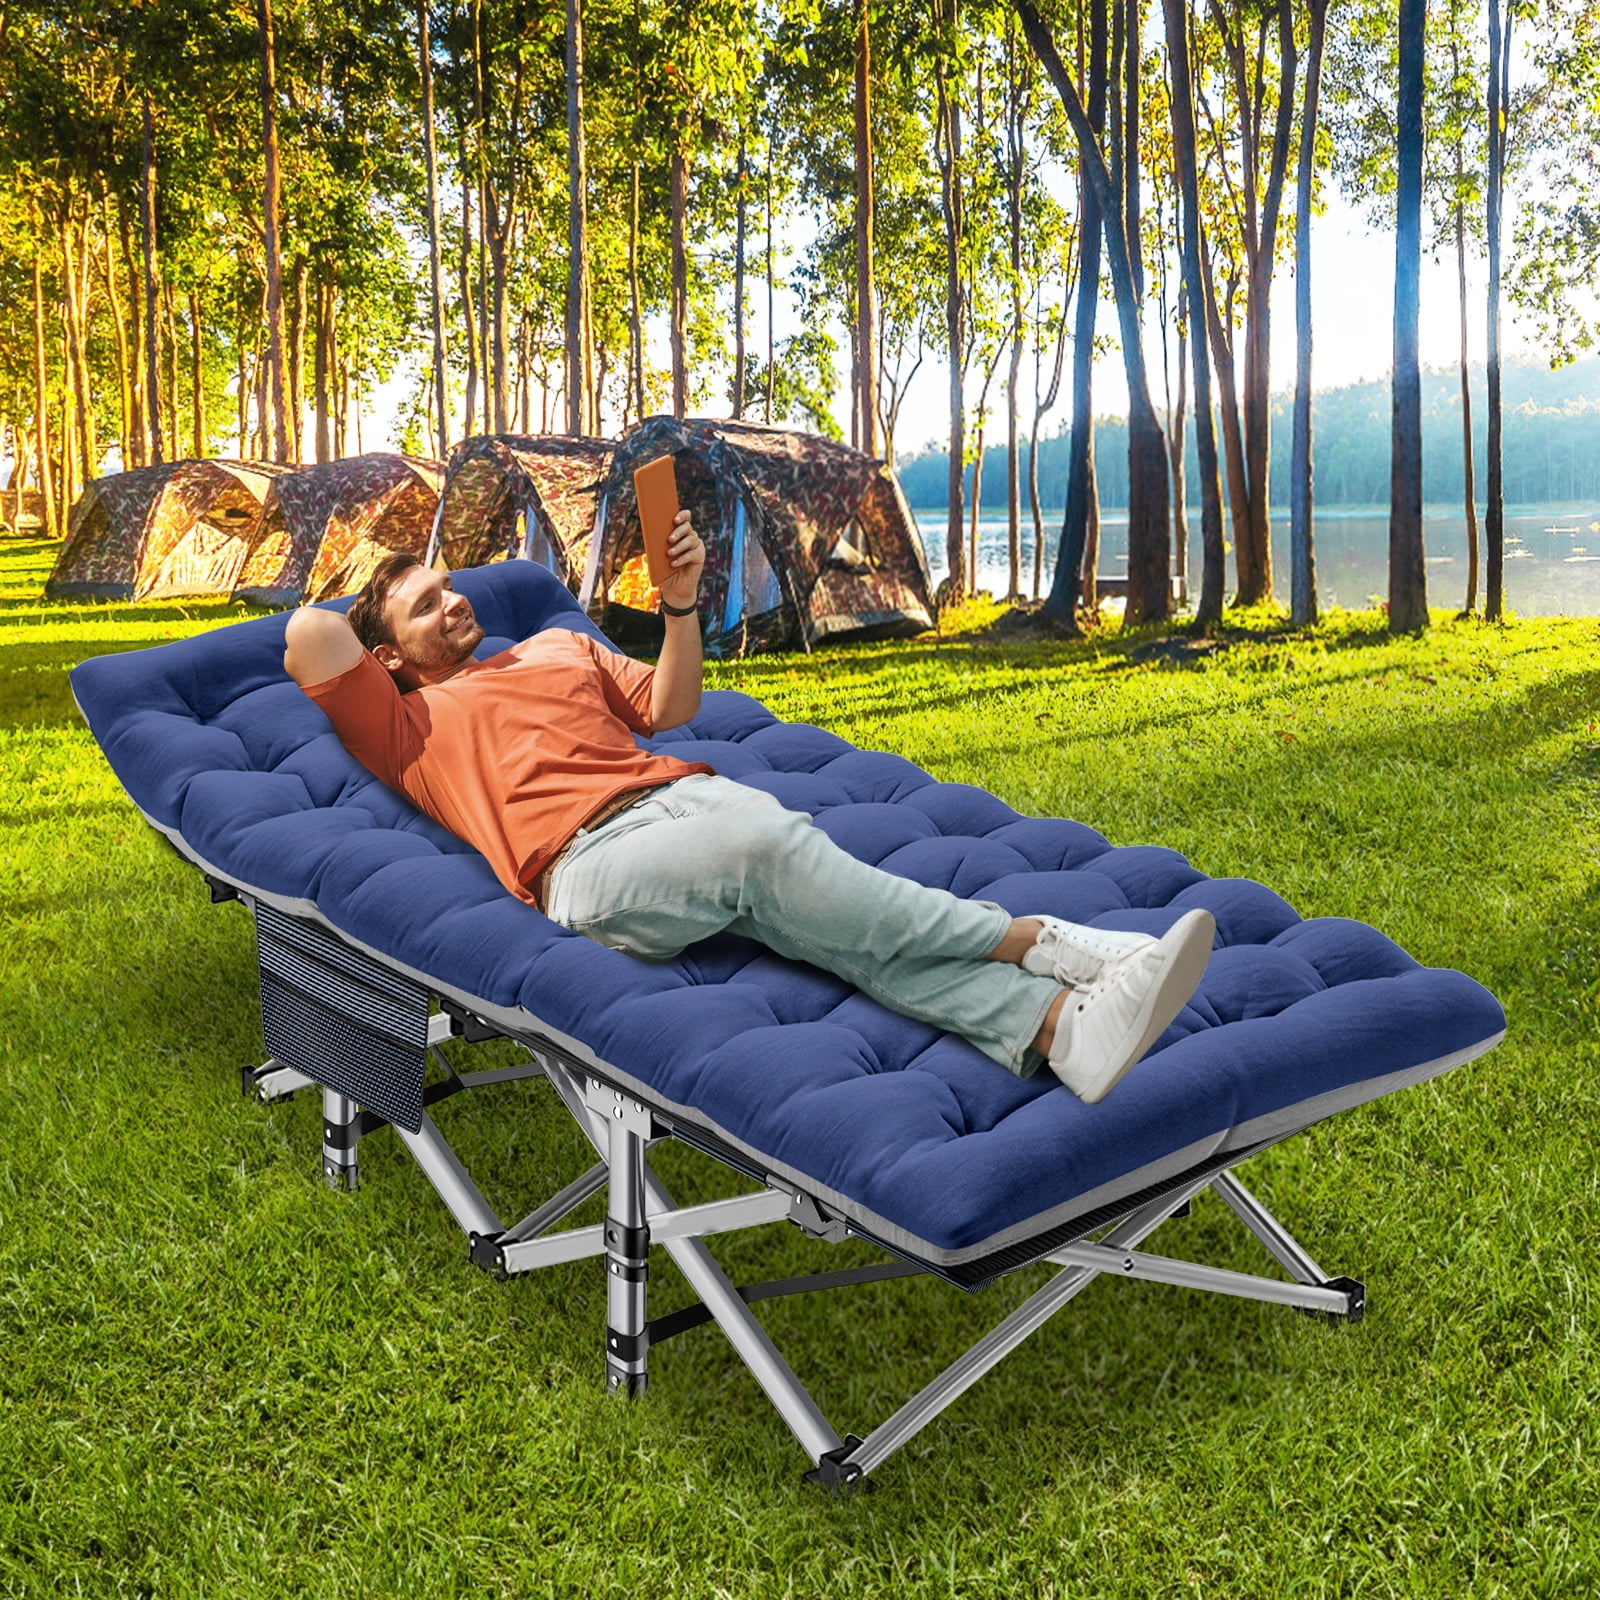 MOPHOTO Camping Cot for Adults, 75